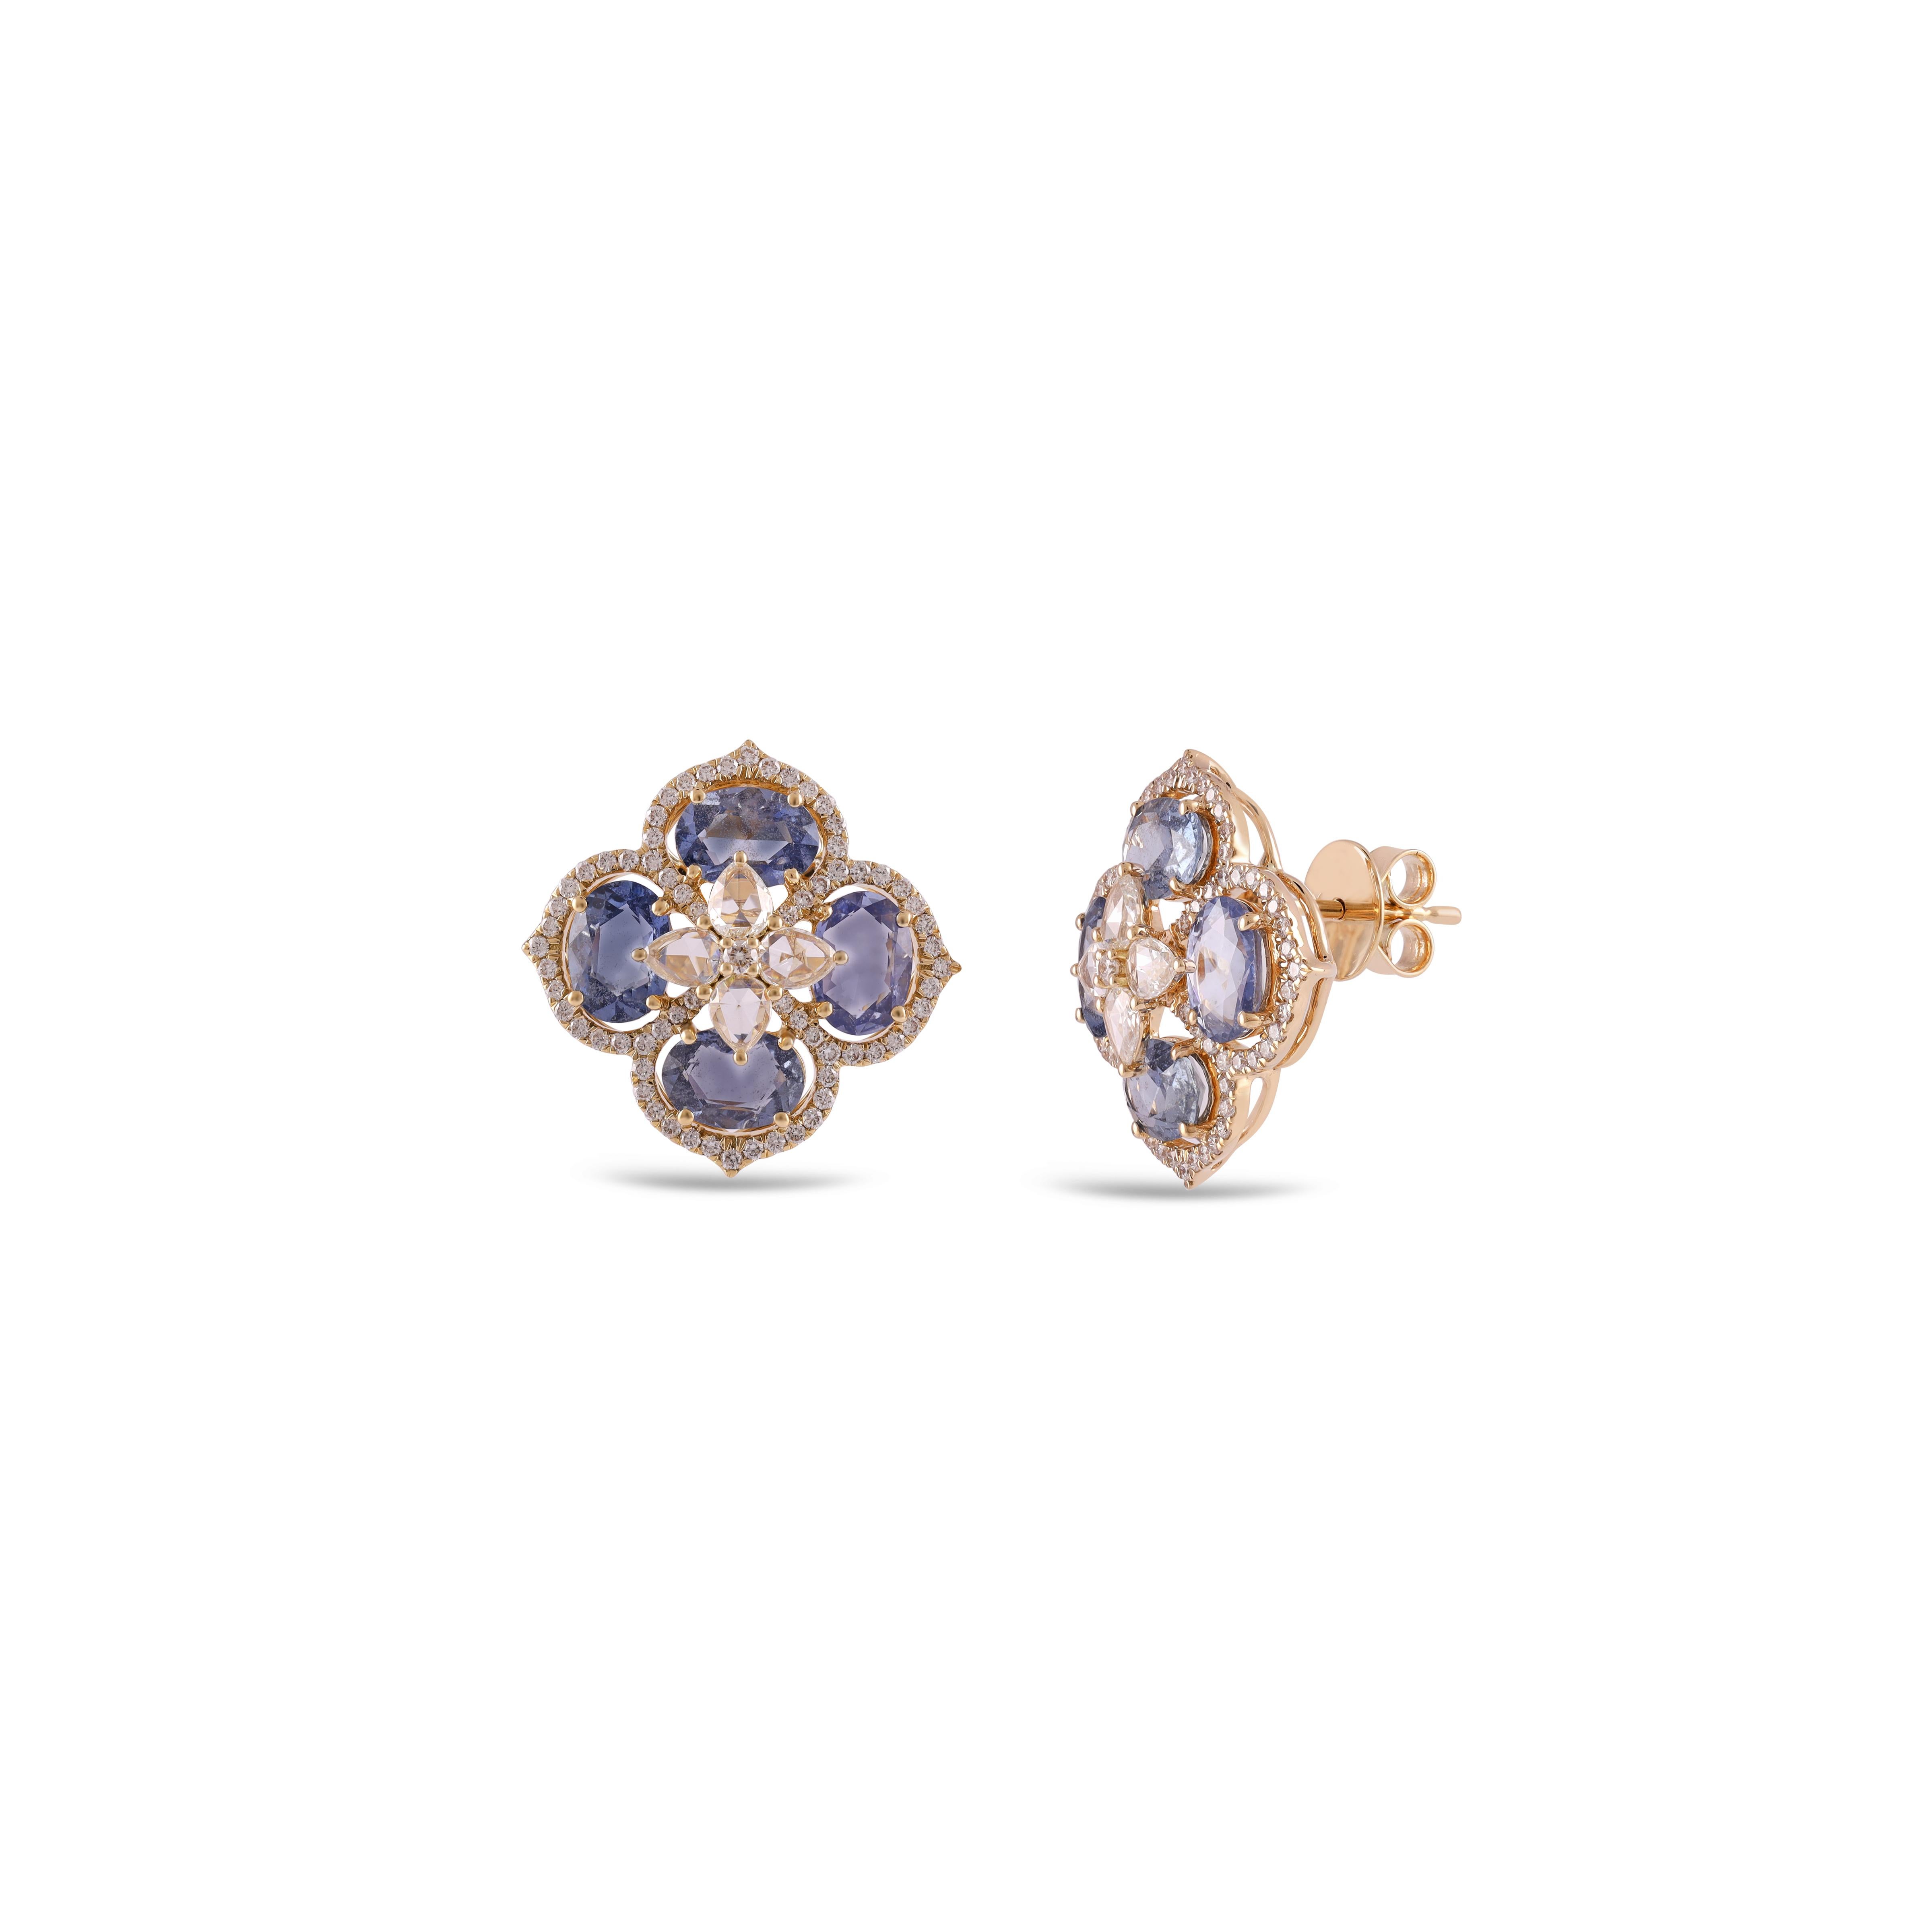 Oval Cut 6.09 Carat  Blue Sapphire Earrings in Yellow Gold with Diamonds.  For Sale